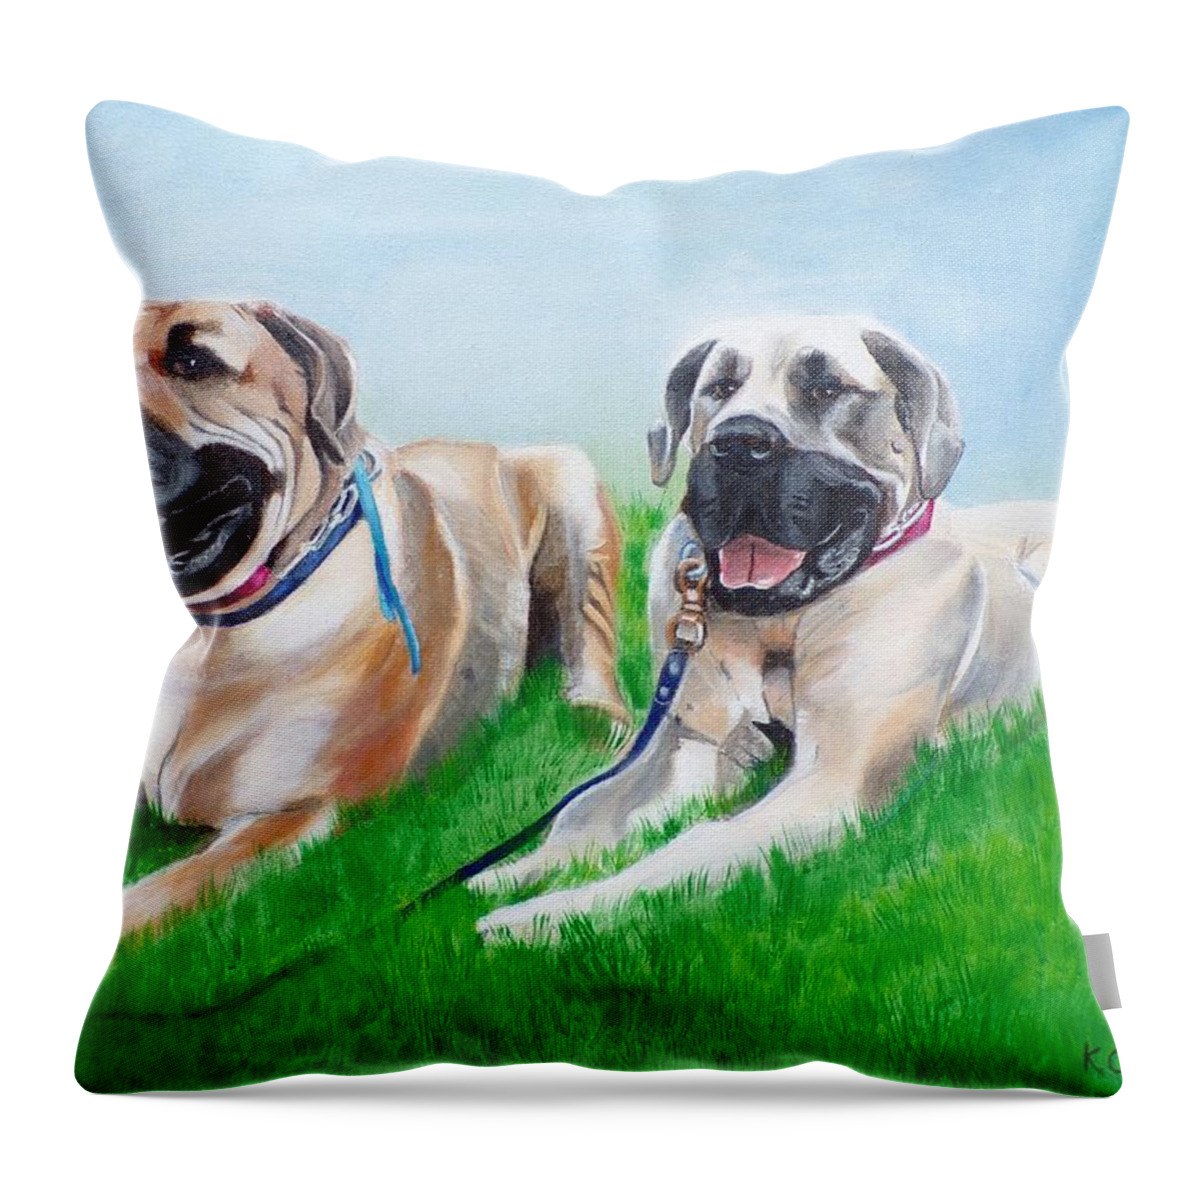 Pets Throw Pillow featuring the painting Bull Mastiffs by Kathie Camara